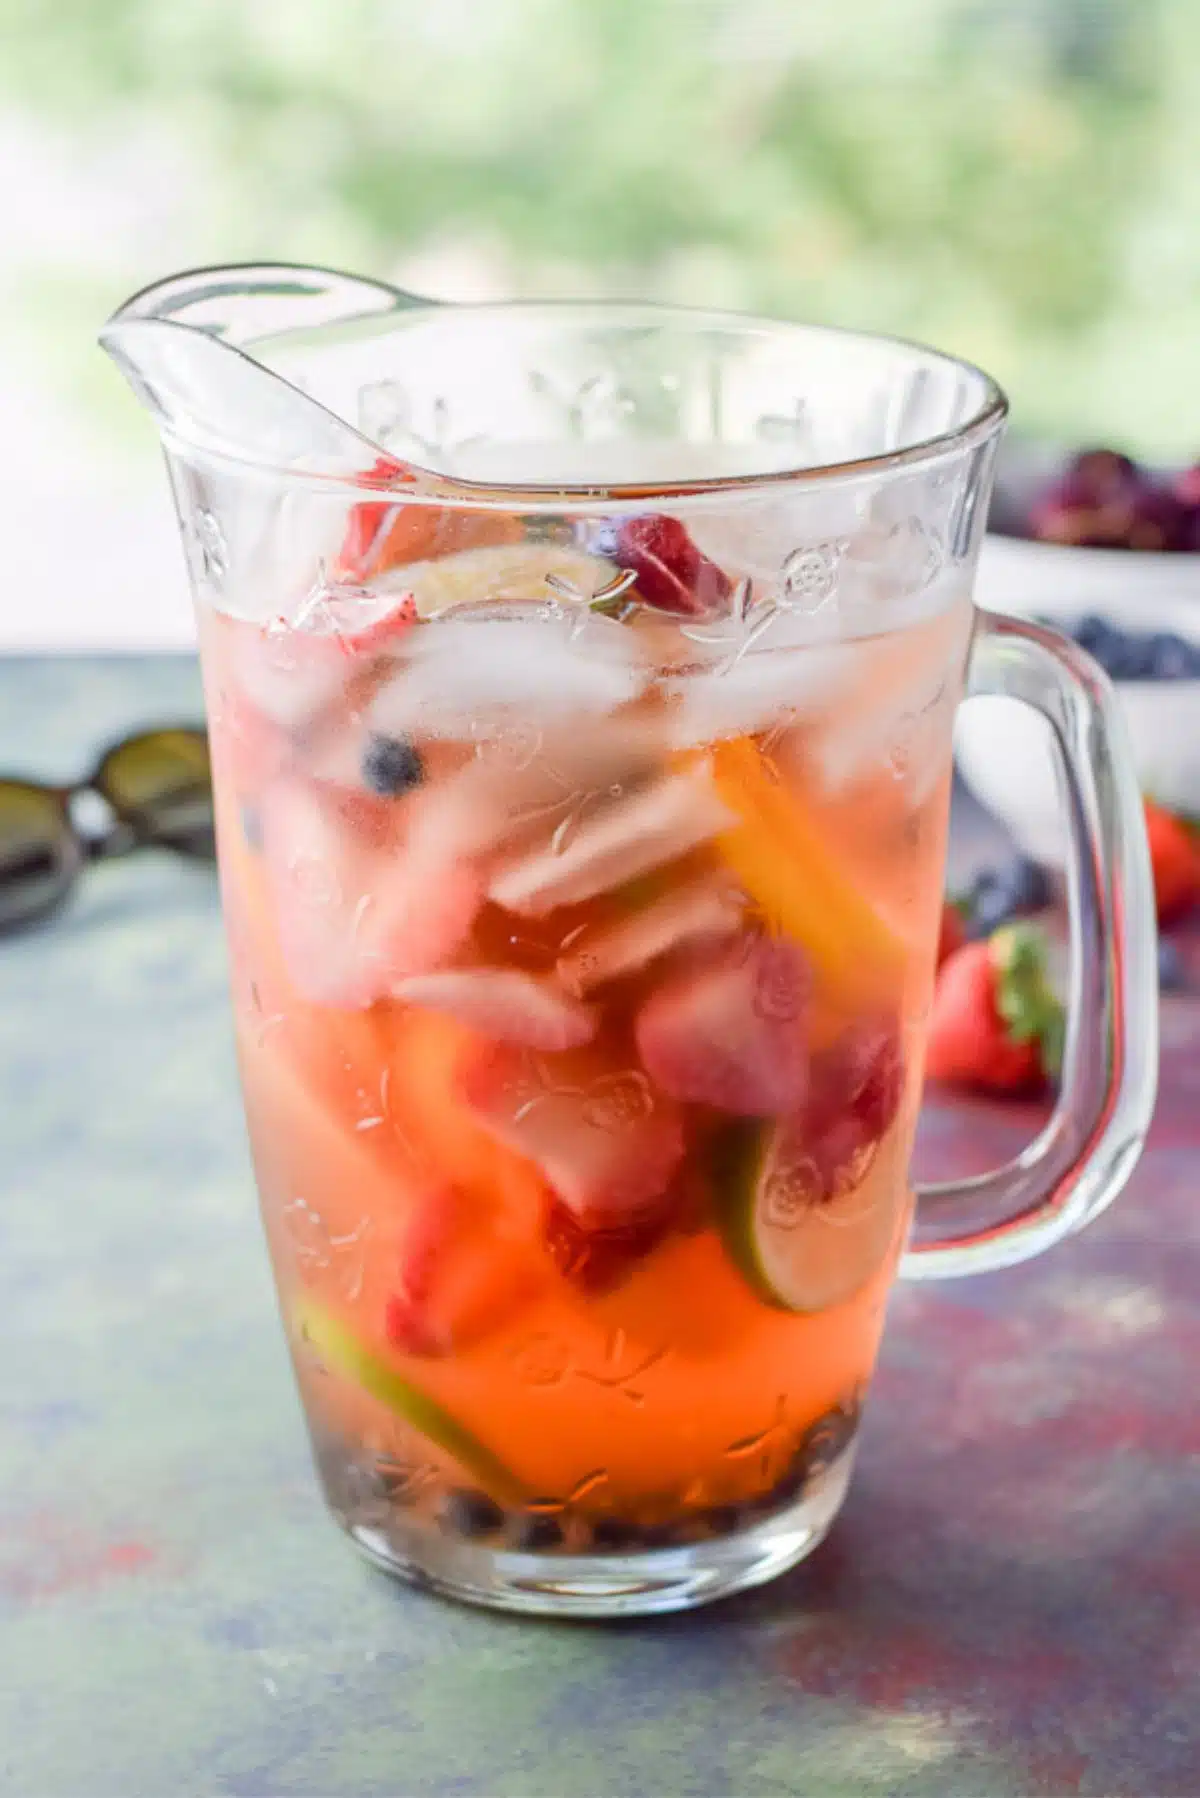 Pitcher of the sangria with strawberries, blueberries and cherries in the background